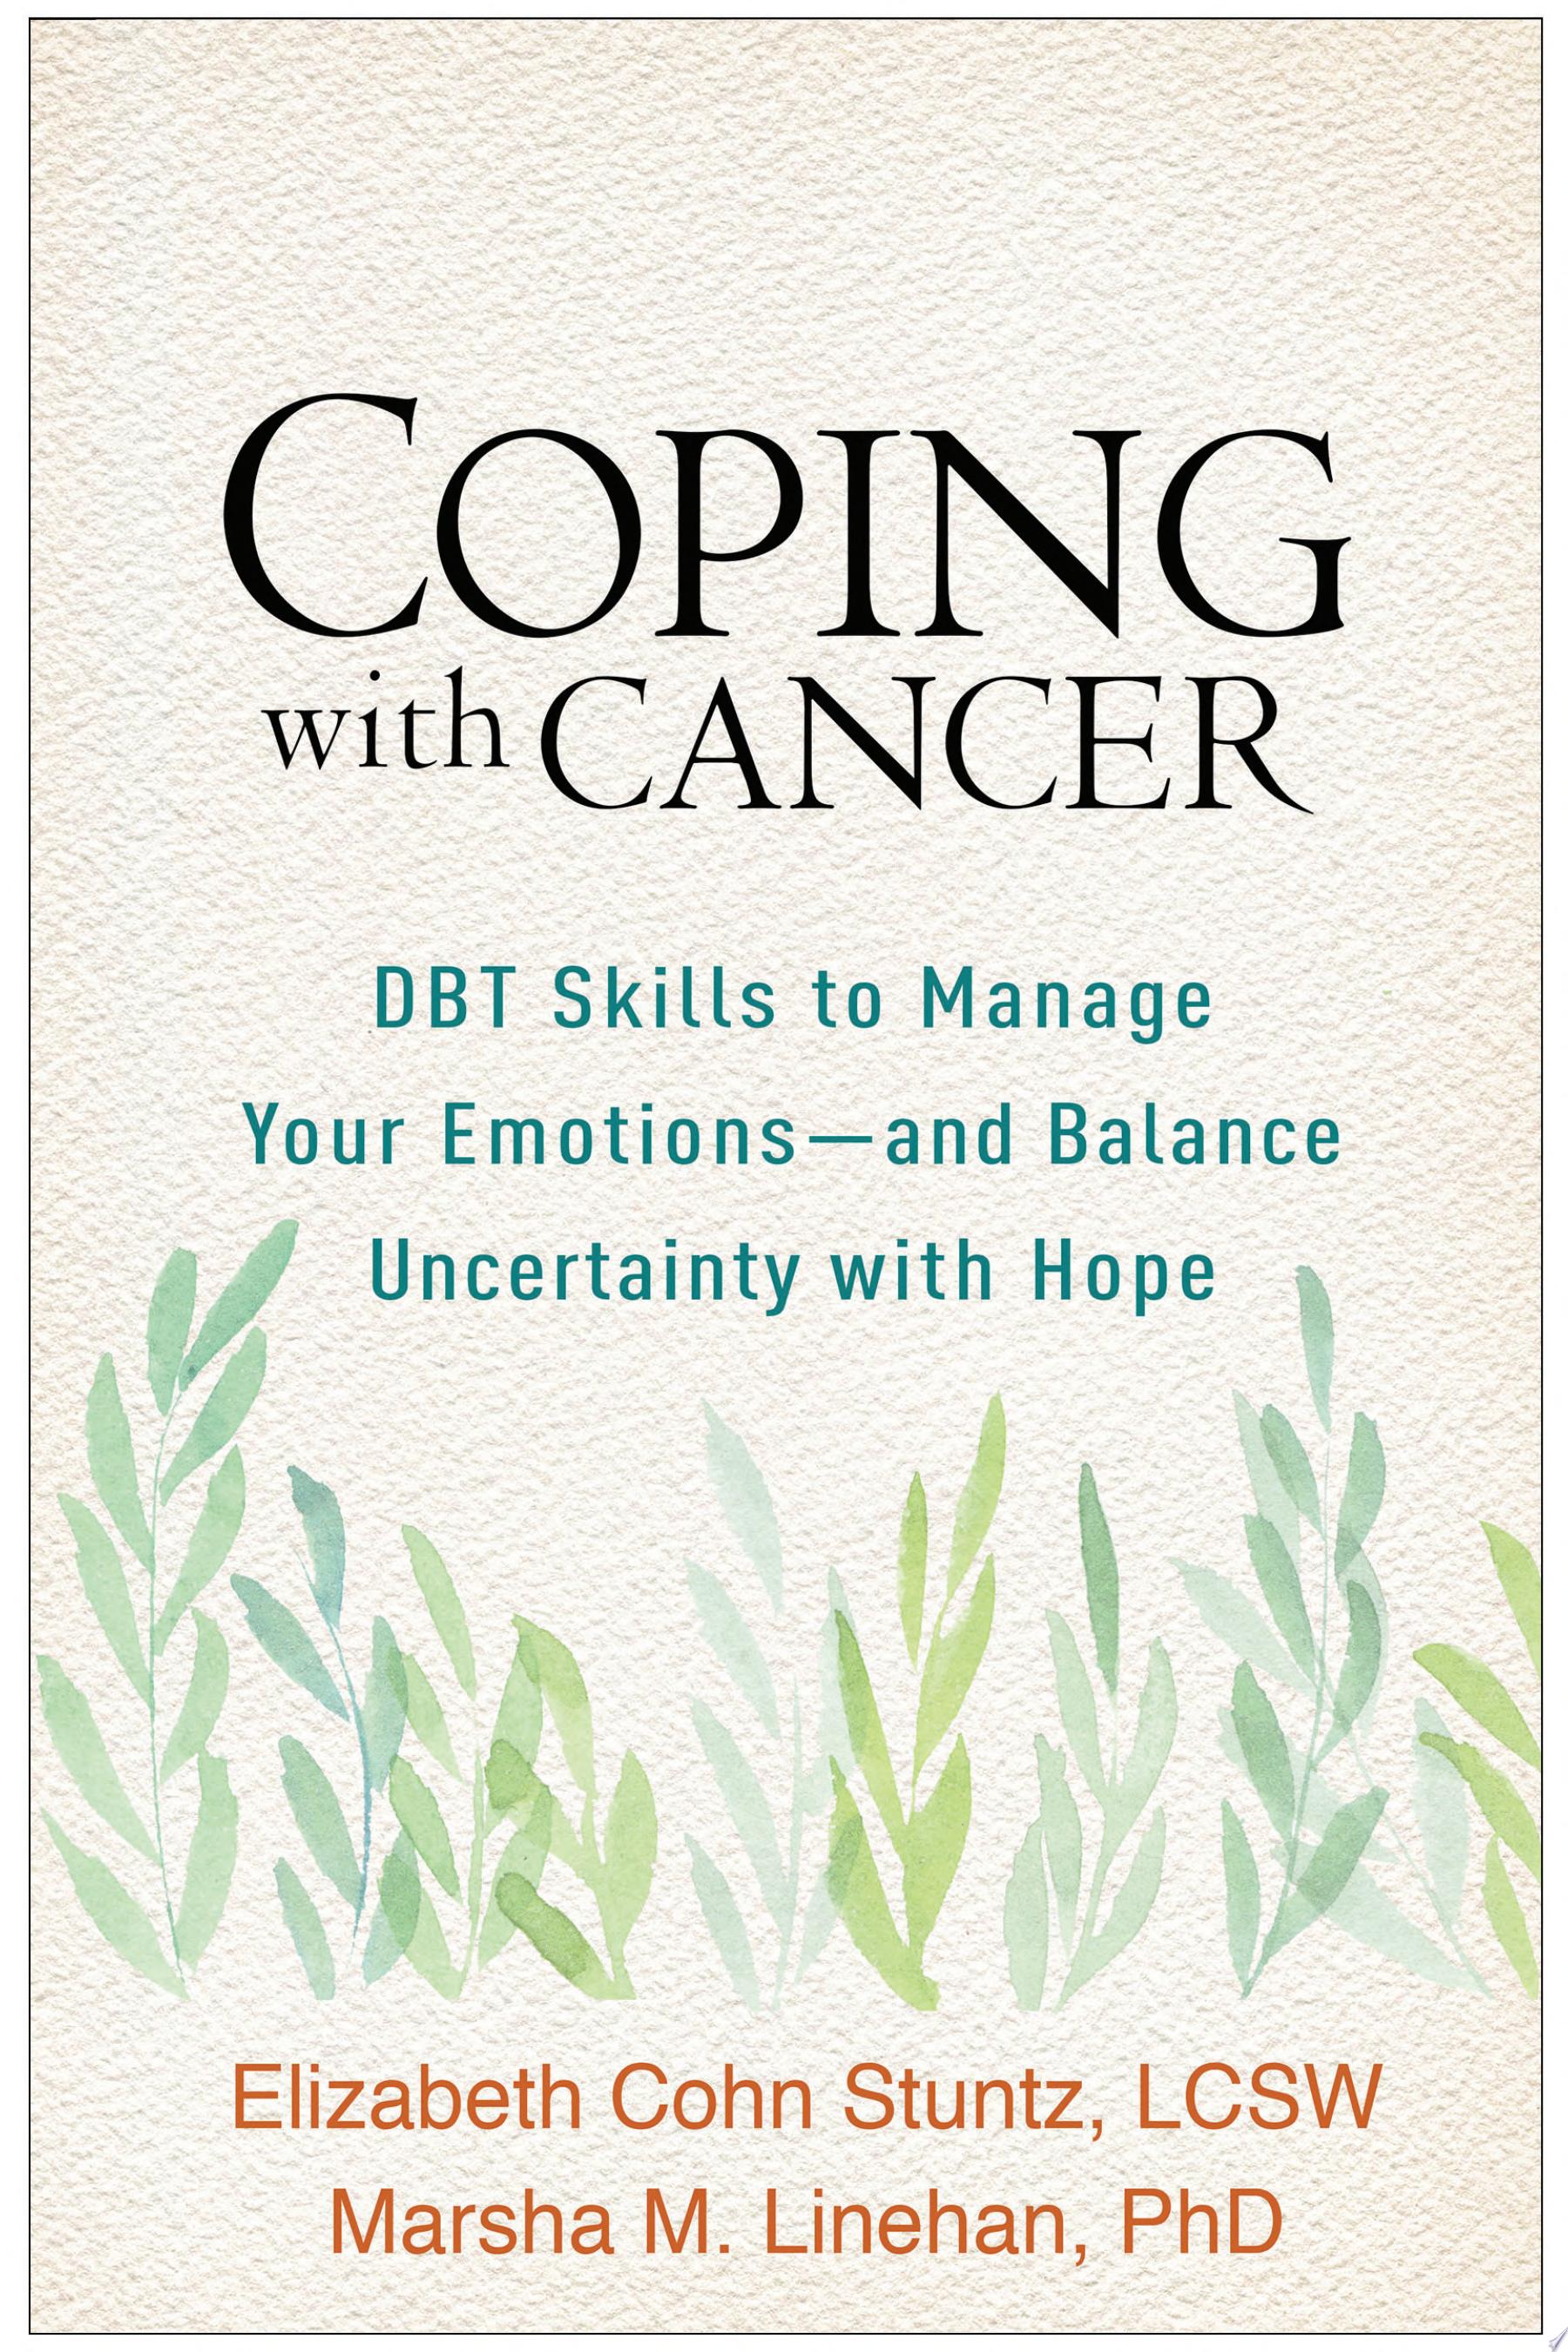 Image for "Coping with Cancer"